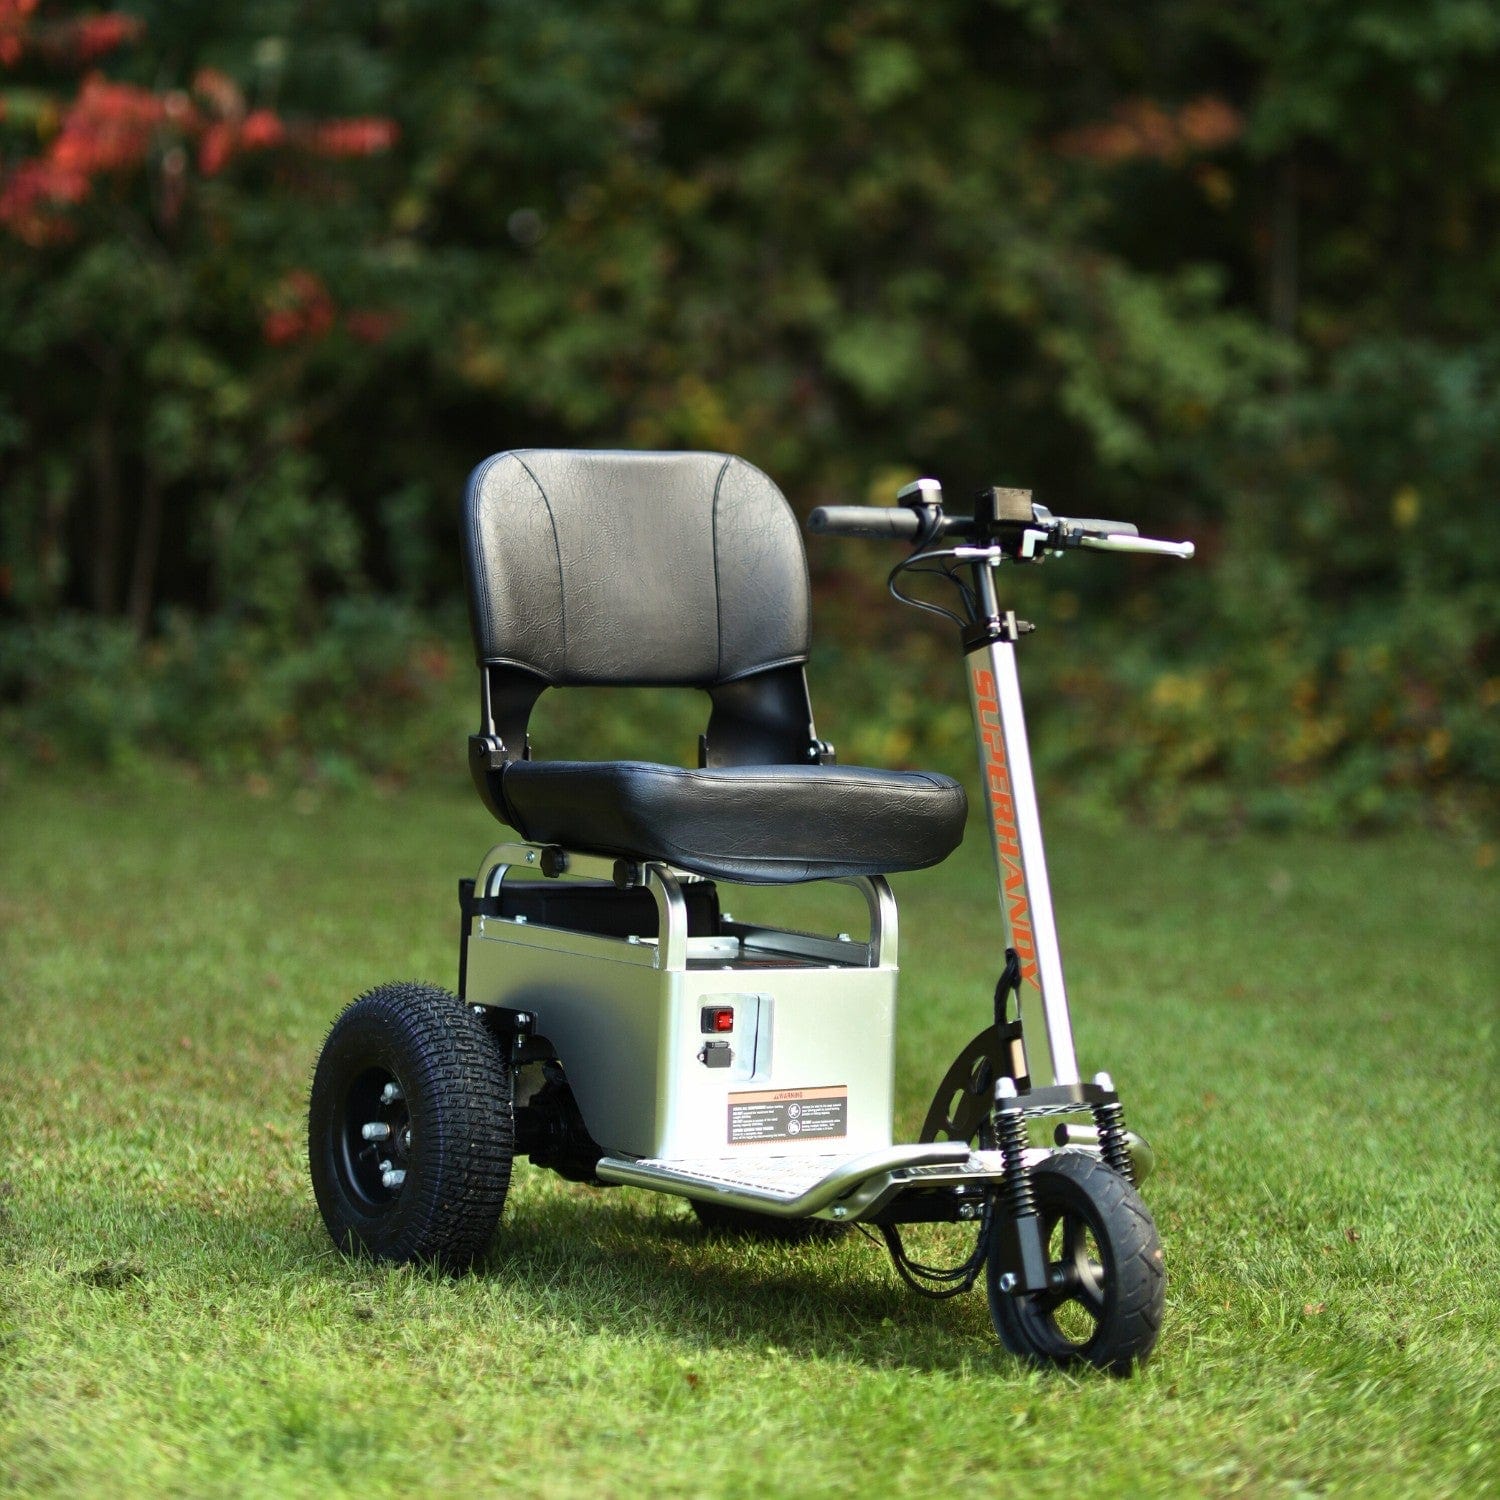 SuperHandy Electric Utility Tugger Ride-On Cart - 24V 9Ah Battery, 2600lbs Towing Capacity